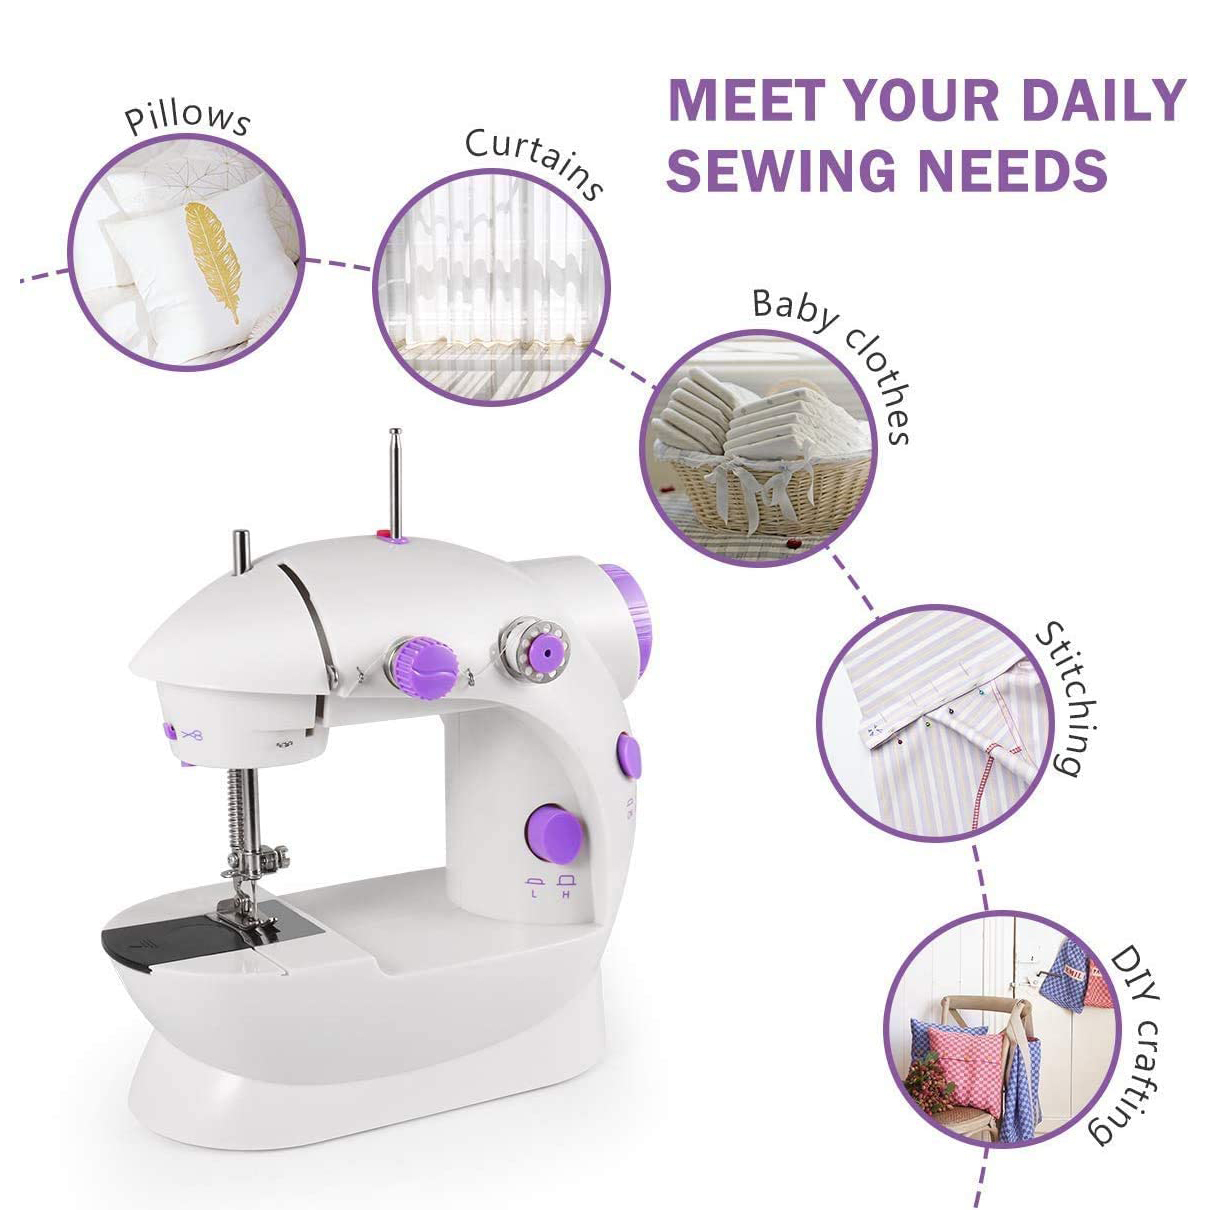 Cozy Cottage Beginner Sewing Machine, Mini Sewing Machine Portable 2-Speed  Double Speed Double Switches Household Kids Beginners Travel Automatic Sewing Machine (White and  Purple)Easy to Use